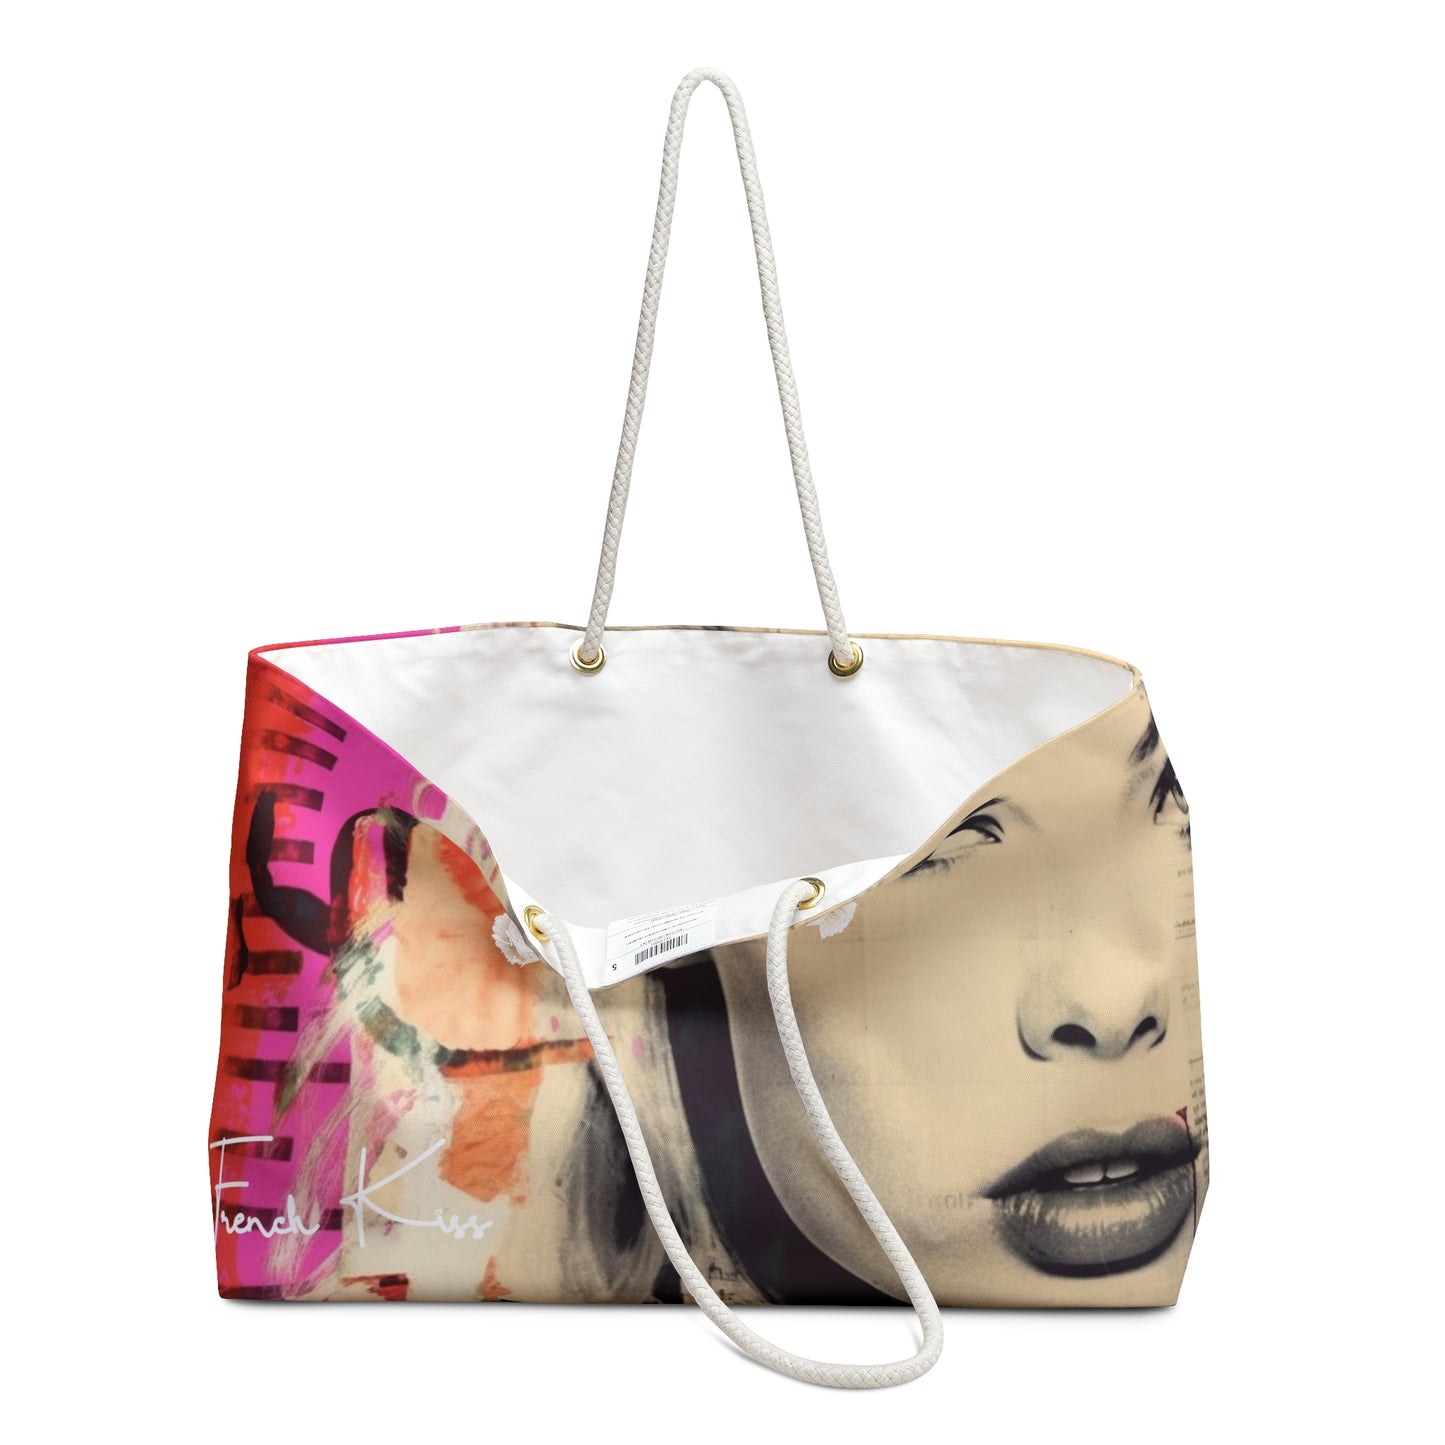 GLAMOUR Sassy Sexy Chic Weekender Accessory Bag French Kiss Pop Art, Classy, Couture, Travel, Fashion, Beauty gift item